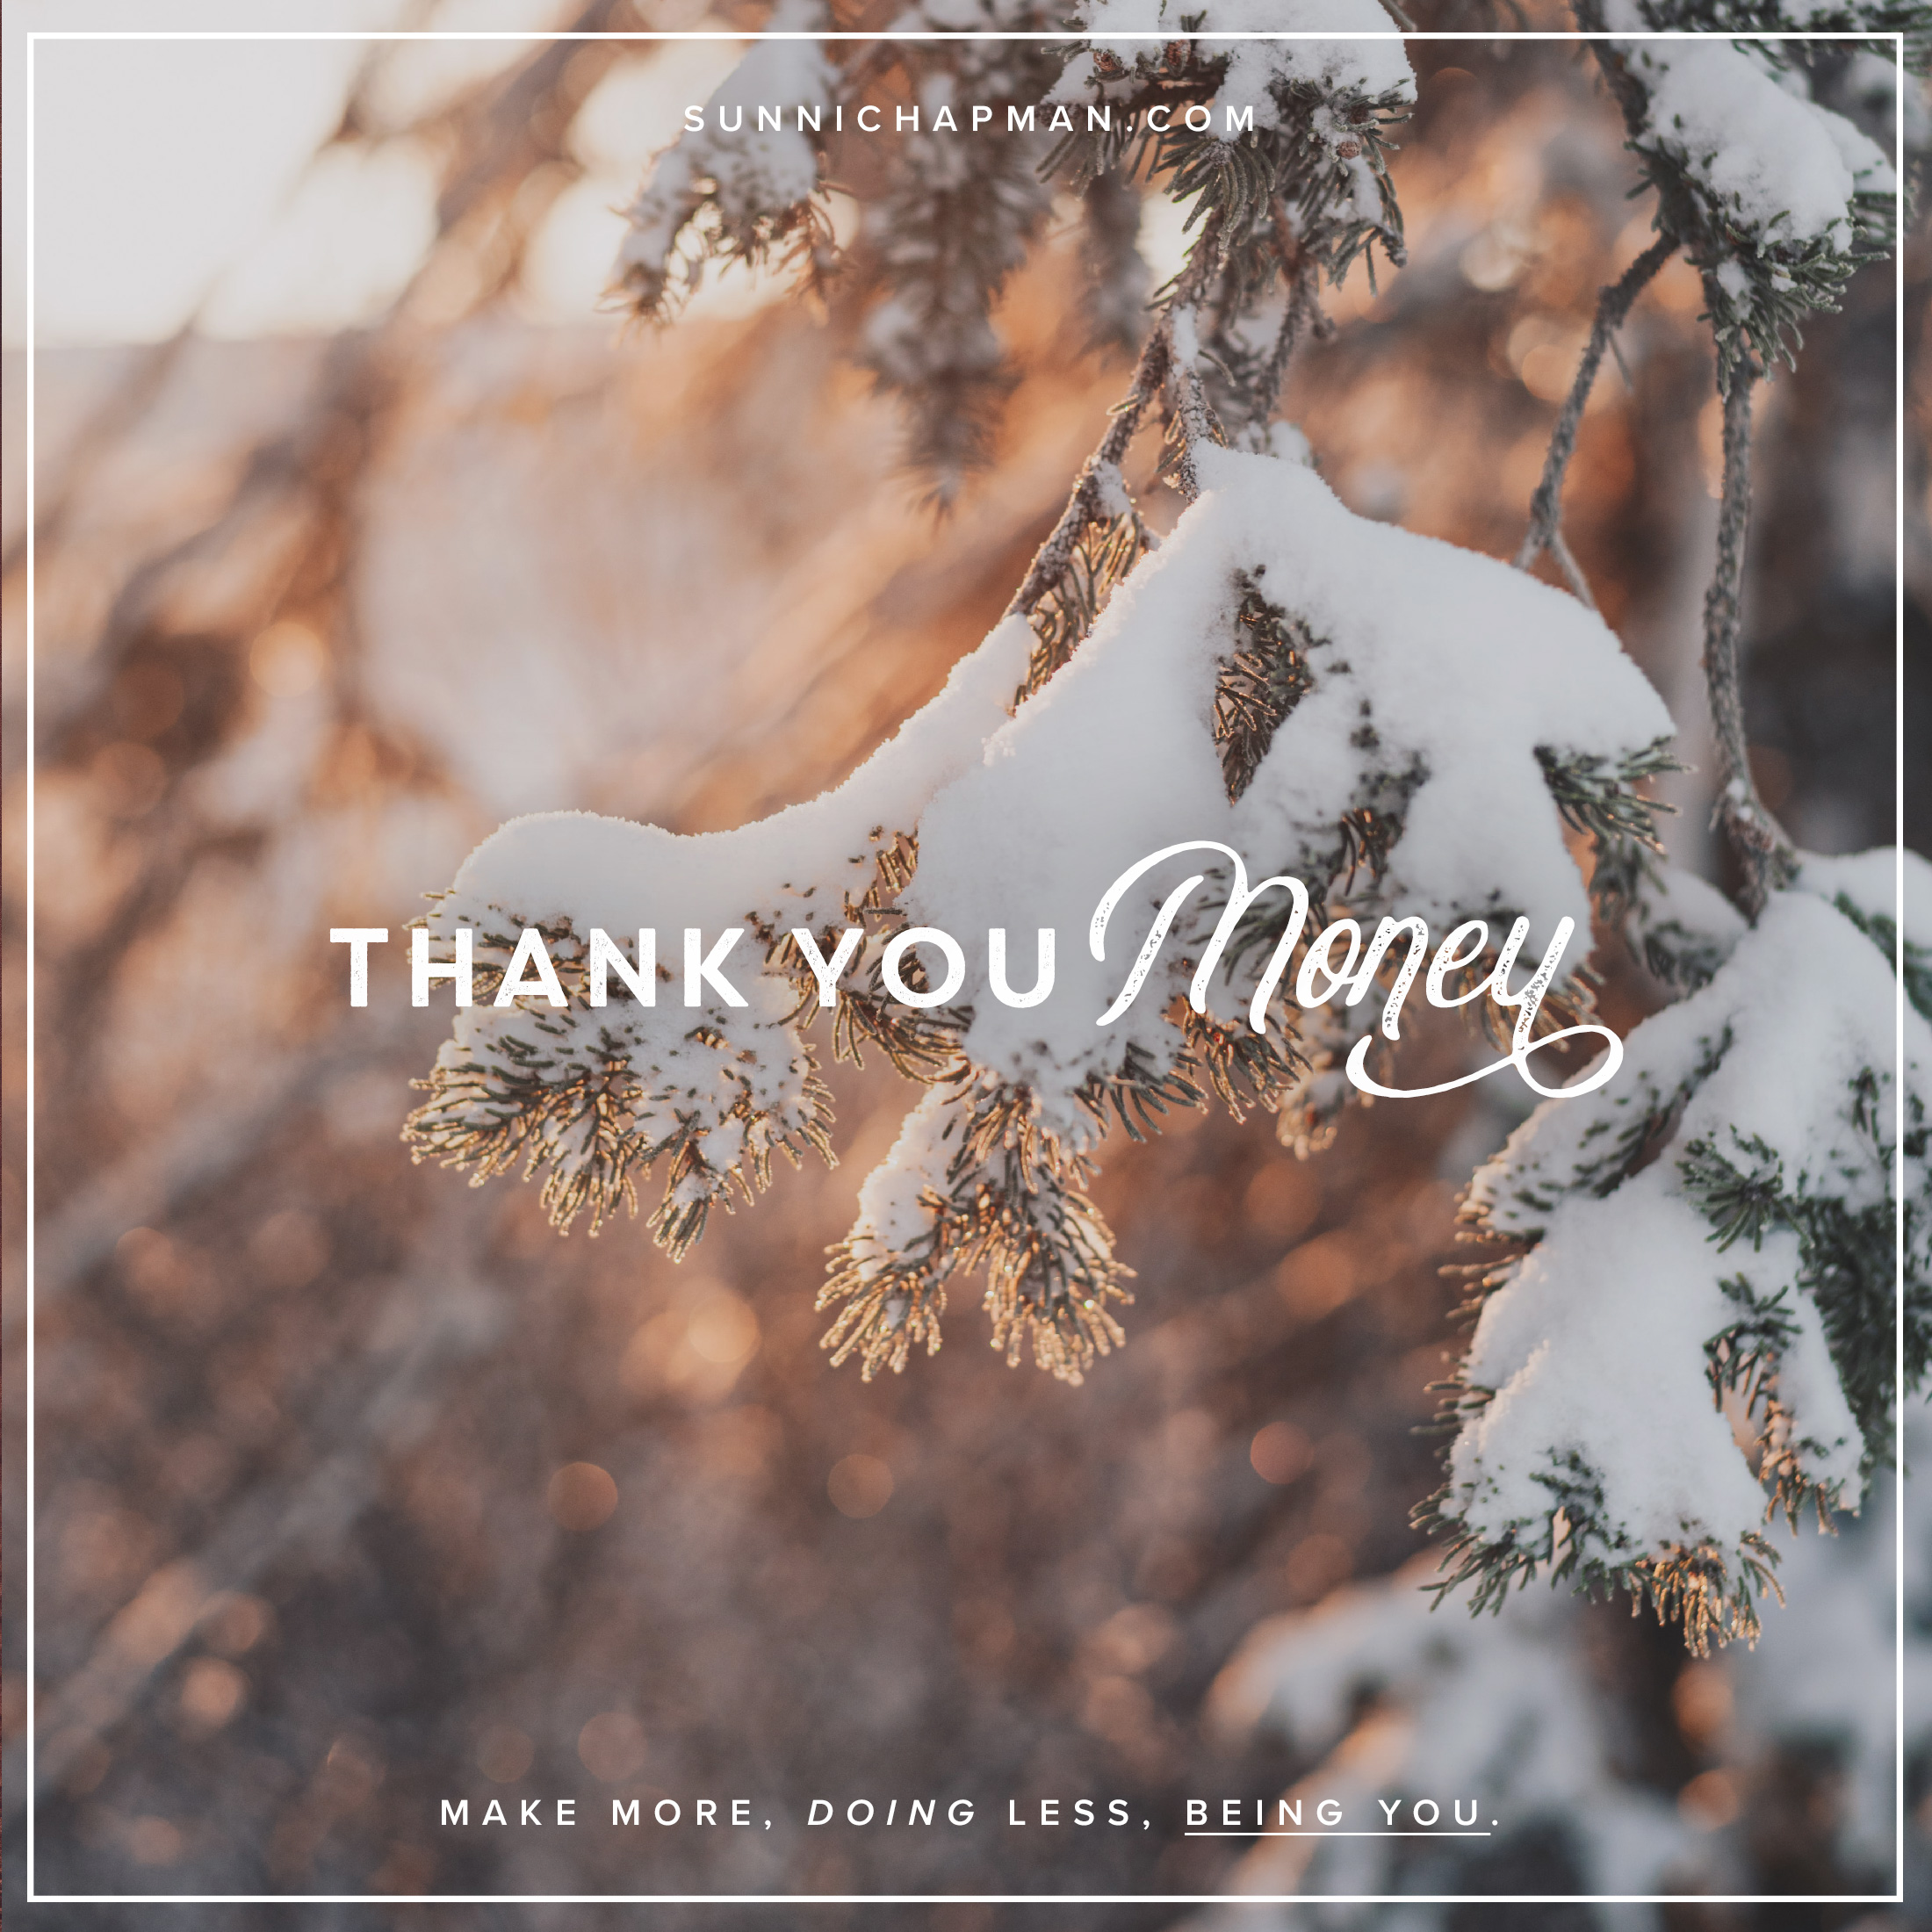 Snow over the tree branch and text: Thank You Money